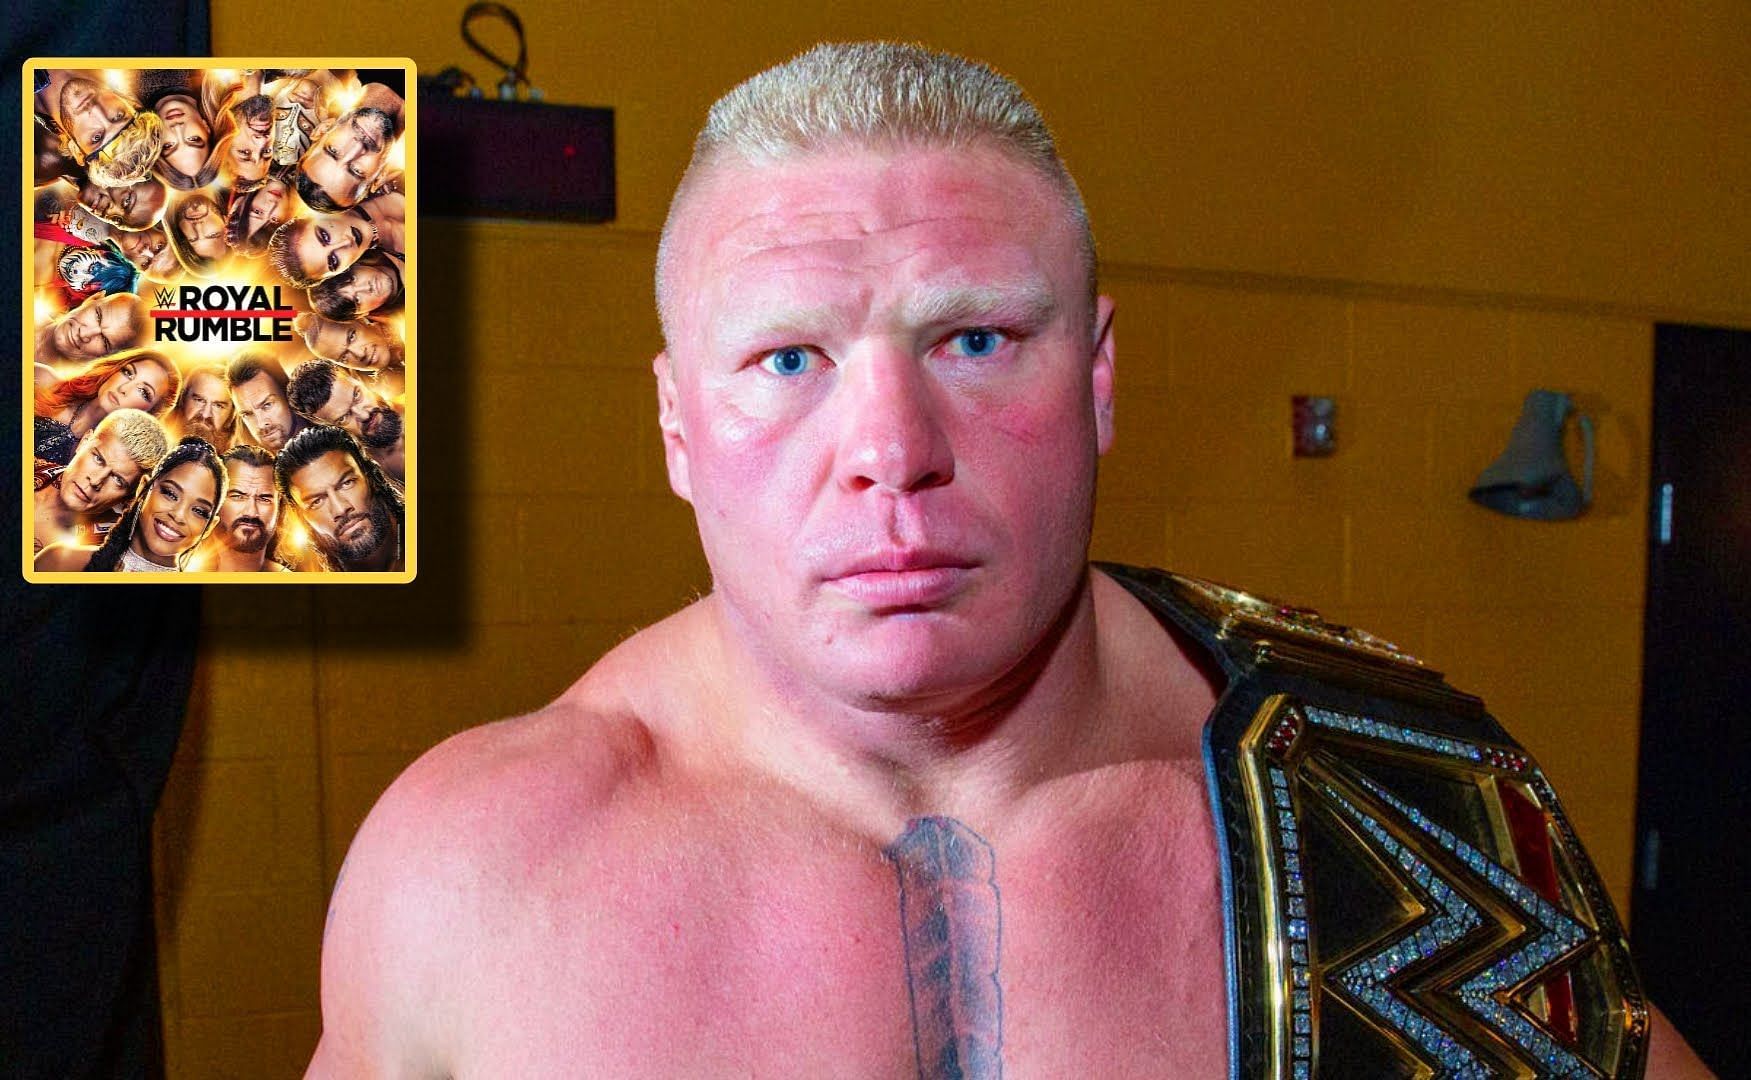 Brock Lesnar has dominated WWE for decades